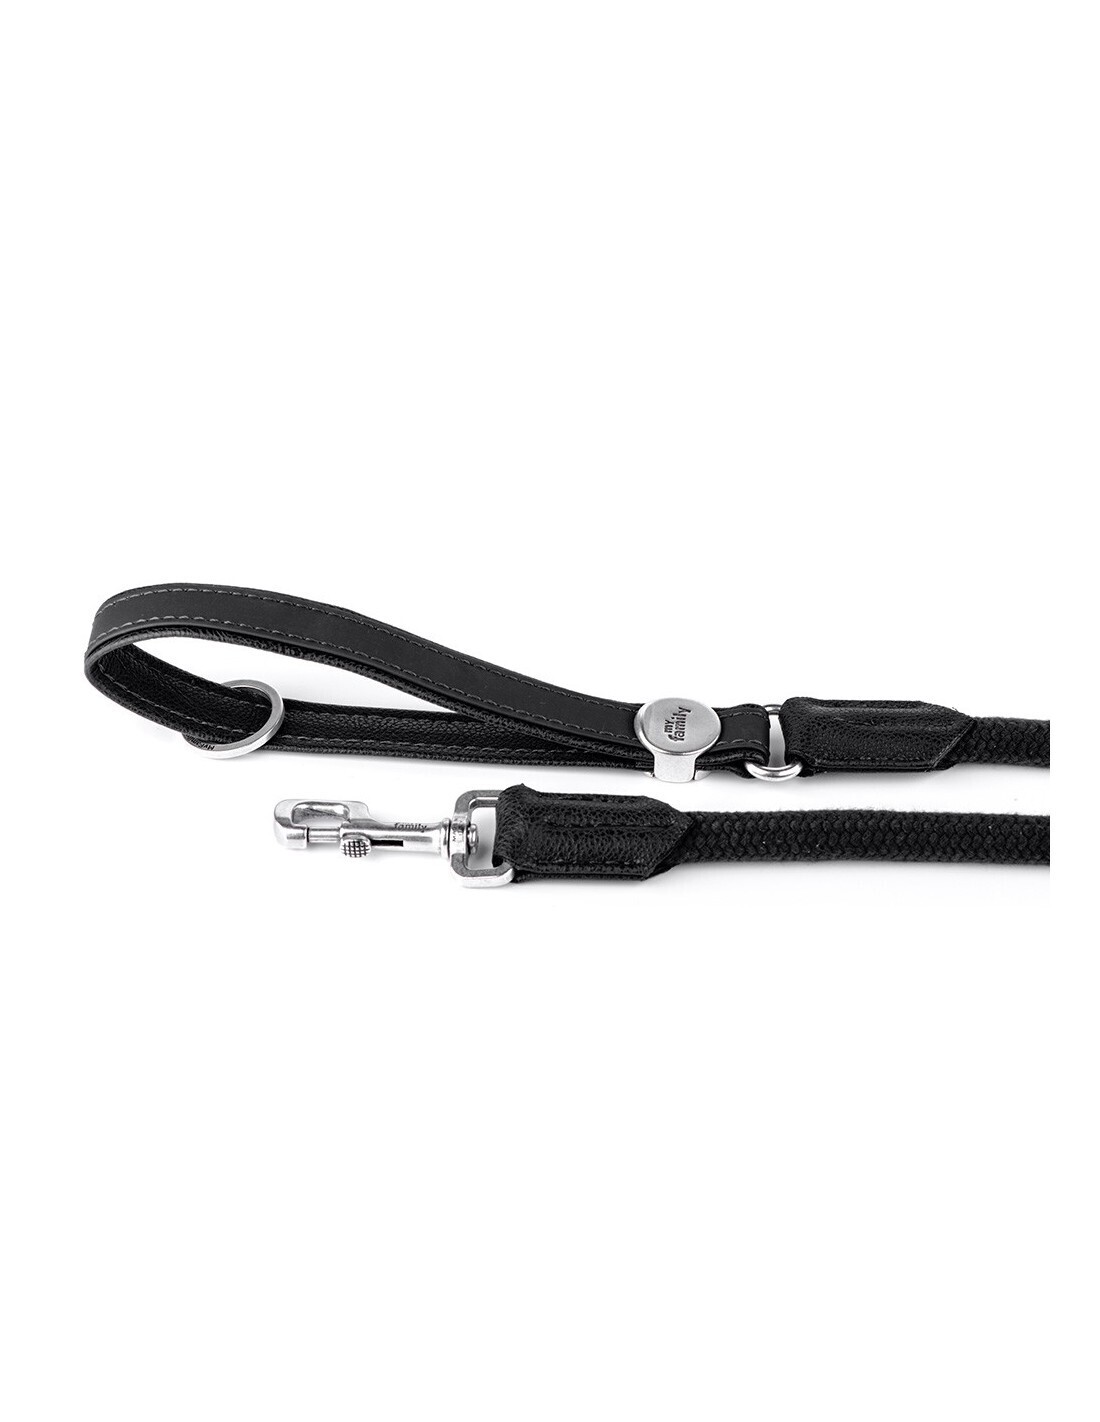 MyFamily Bilbao Dog Leash in Fine Crafted Black Leatherette and Rope